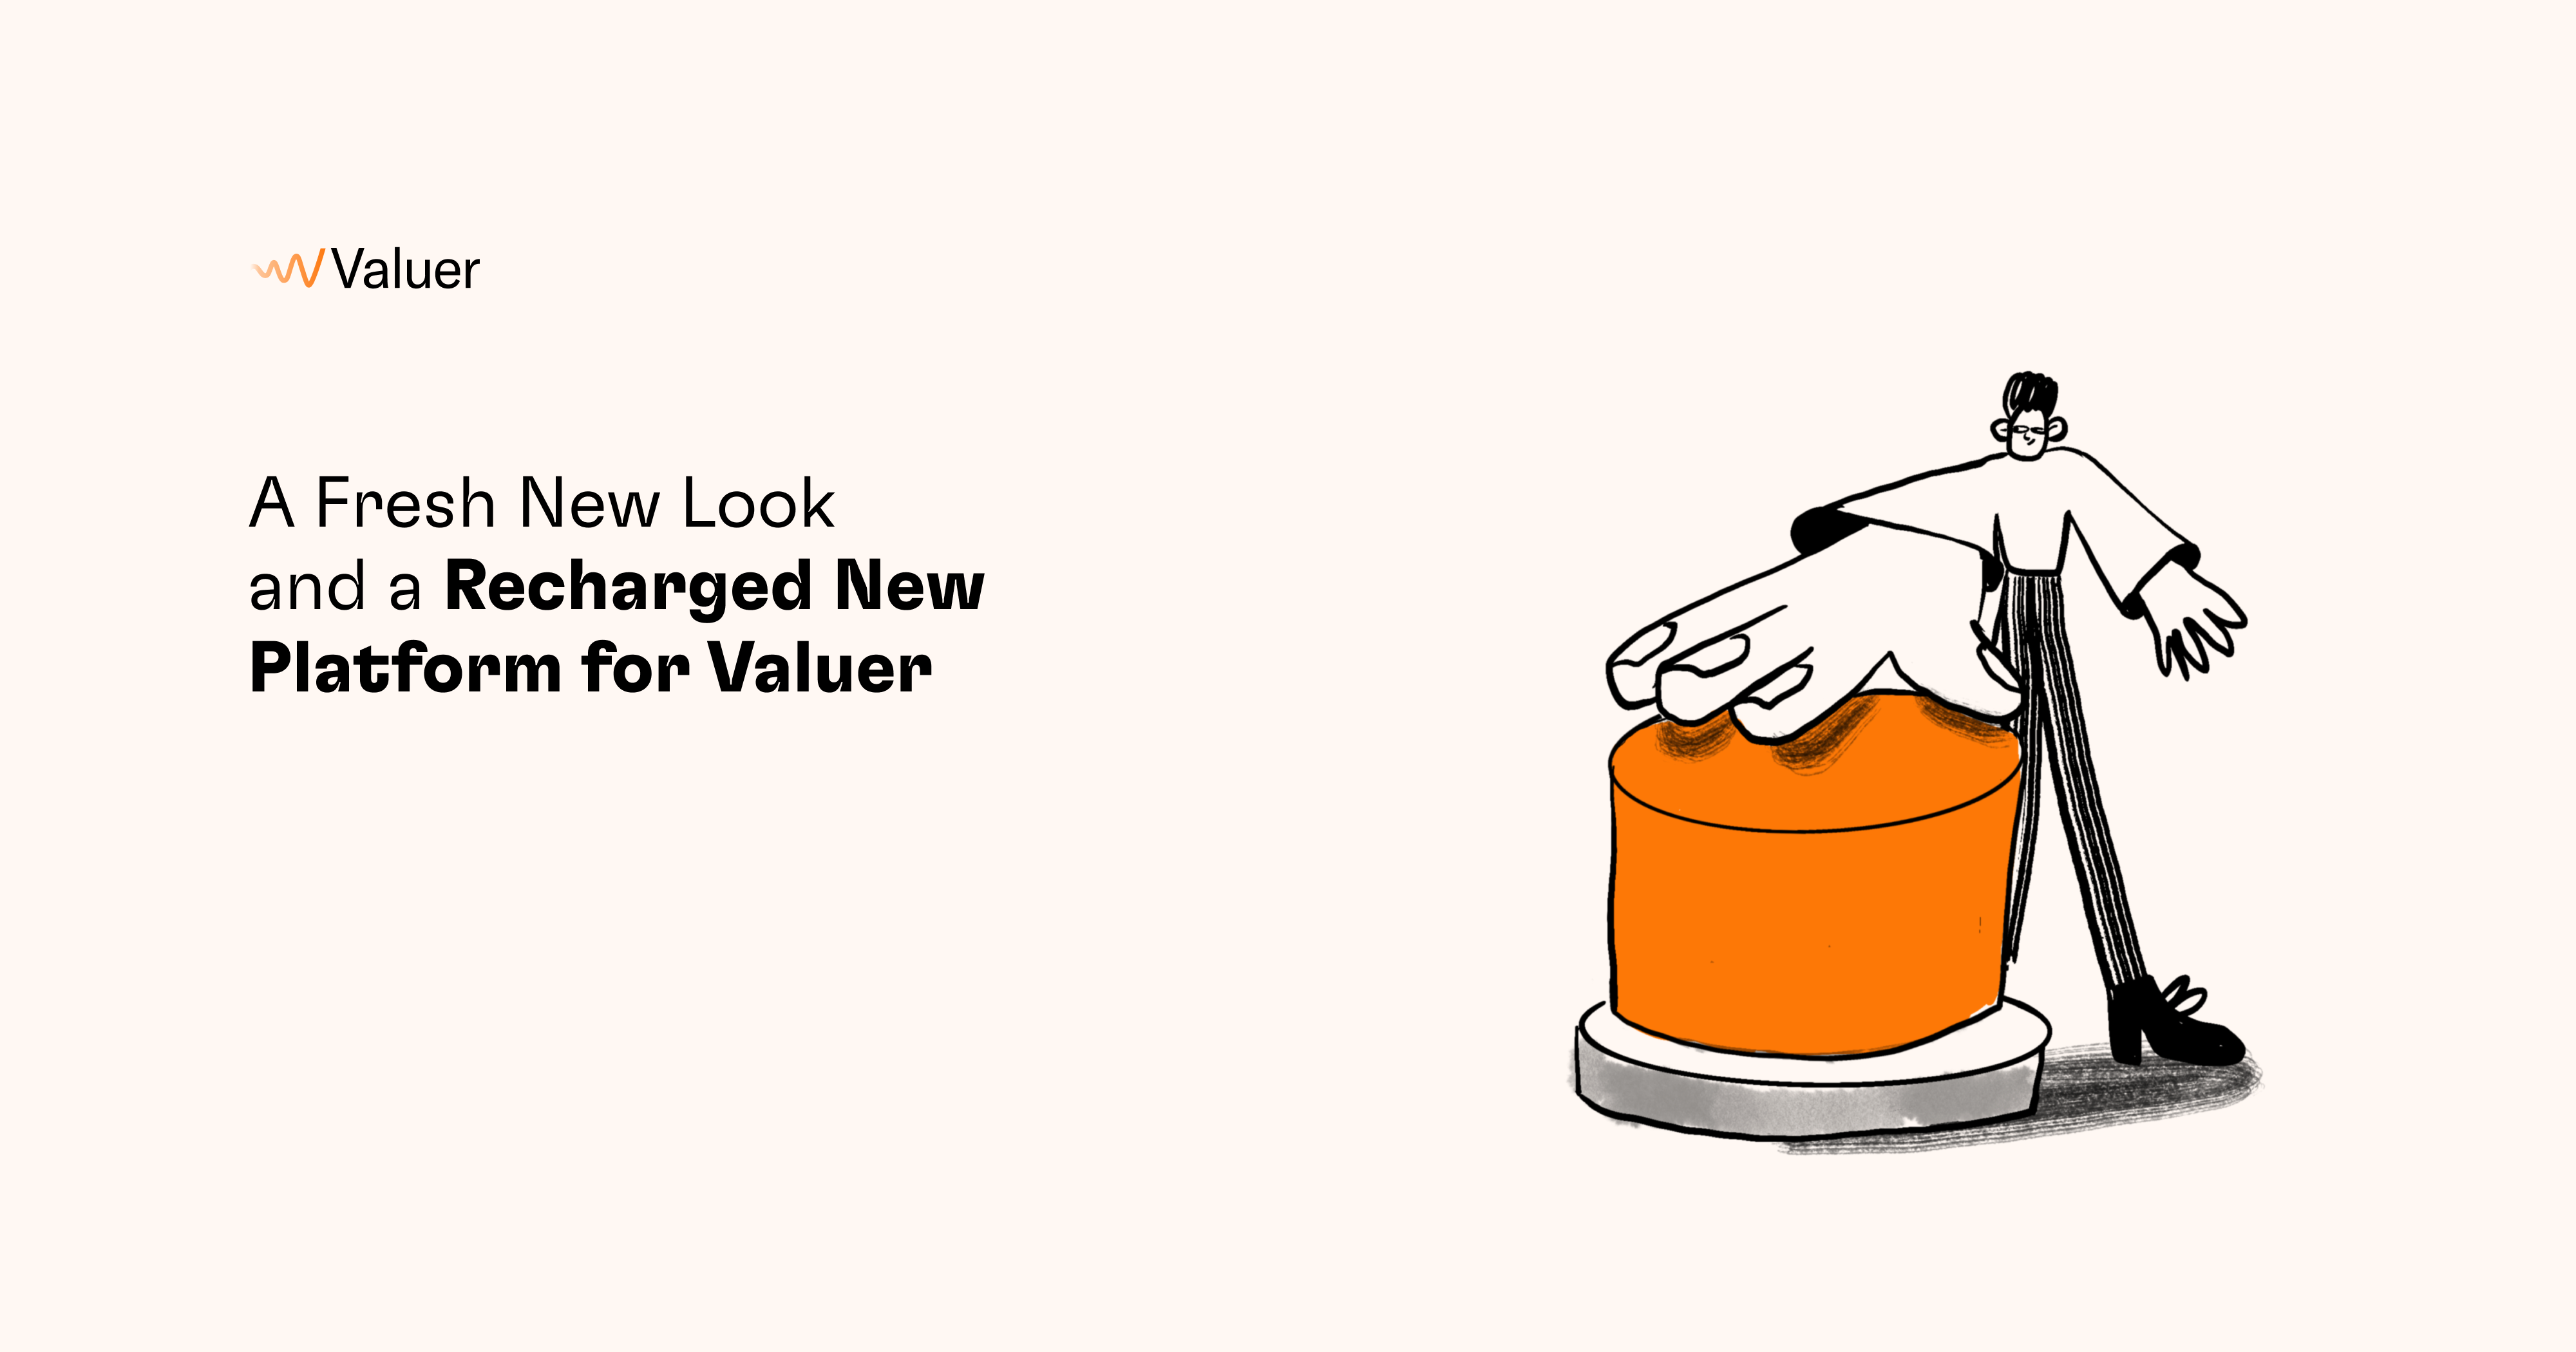 A New Look and a Recharged Innovation Platform for Valuer